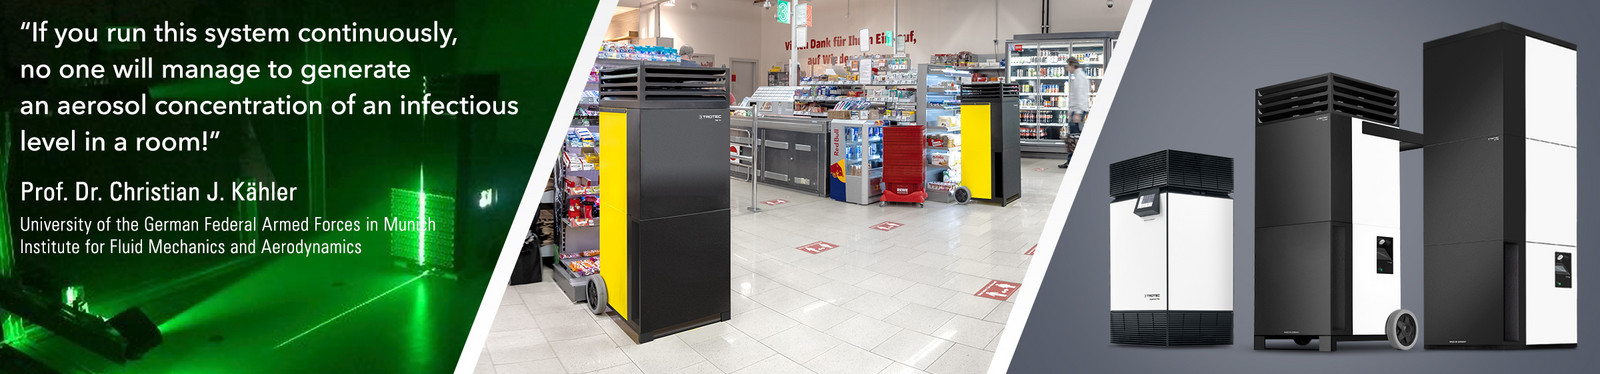 Trotec high-performance air purifiers create virus-free room and breathing air in stationary retail shops